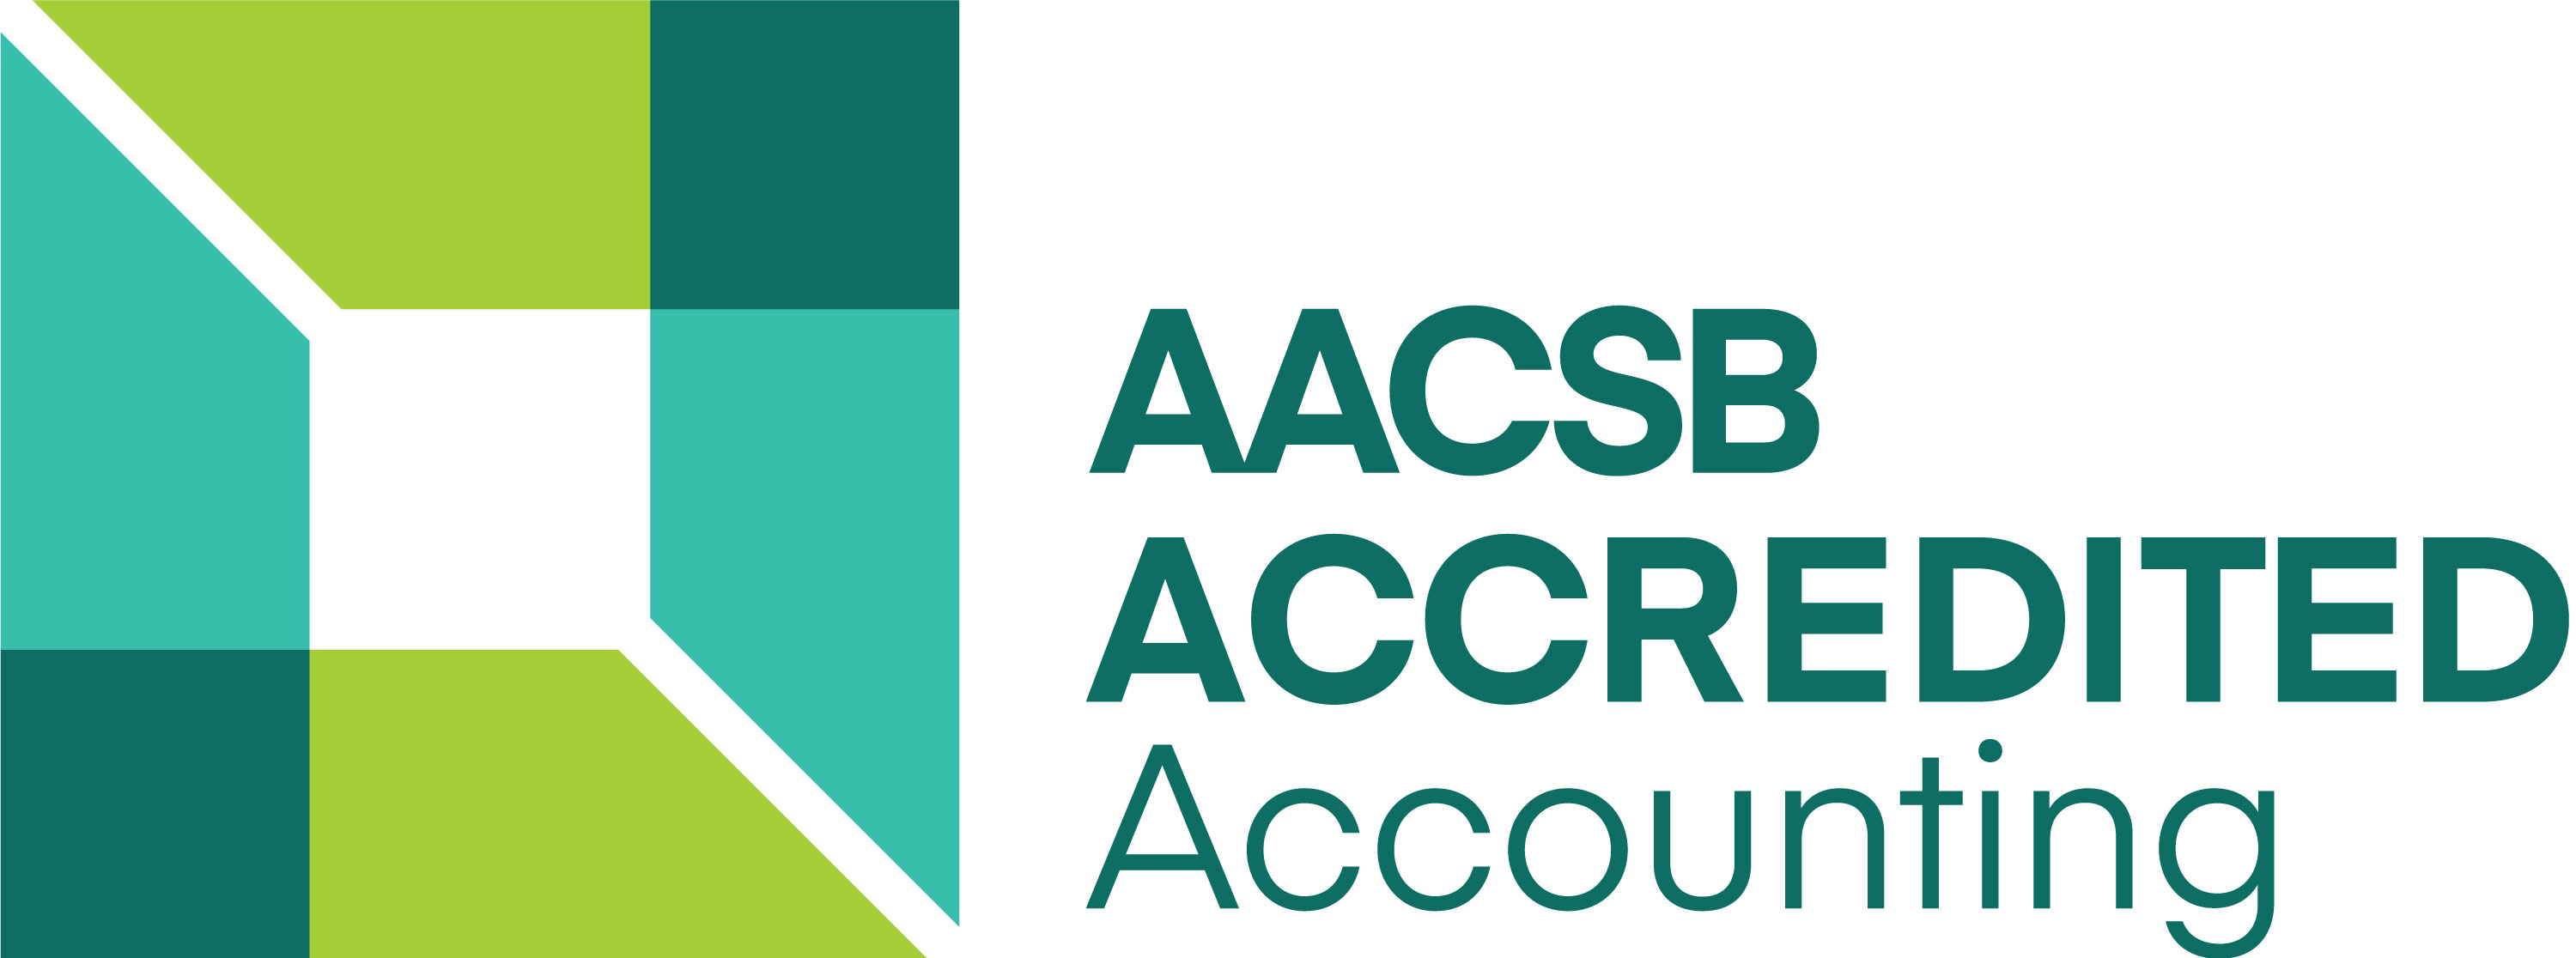 A A C S B Accredited Accounting